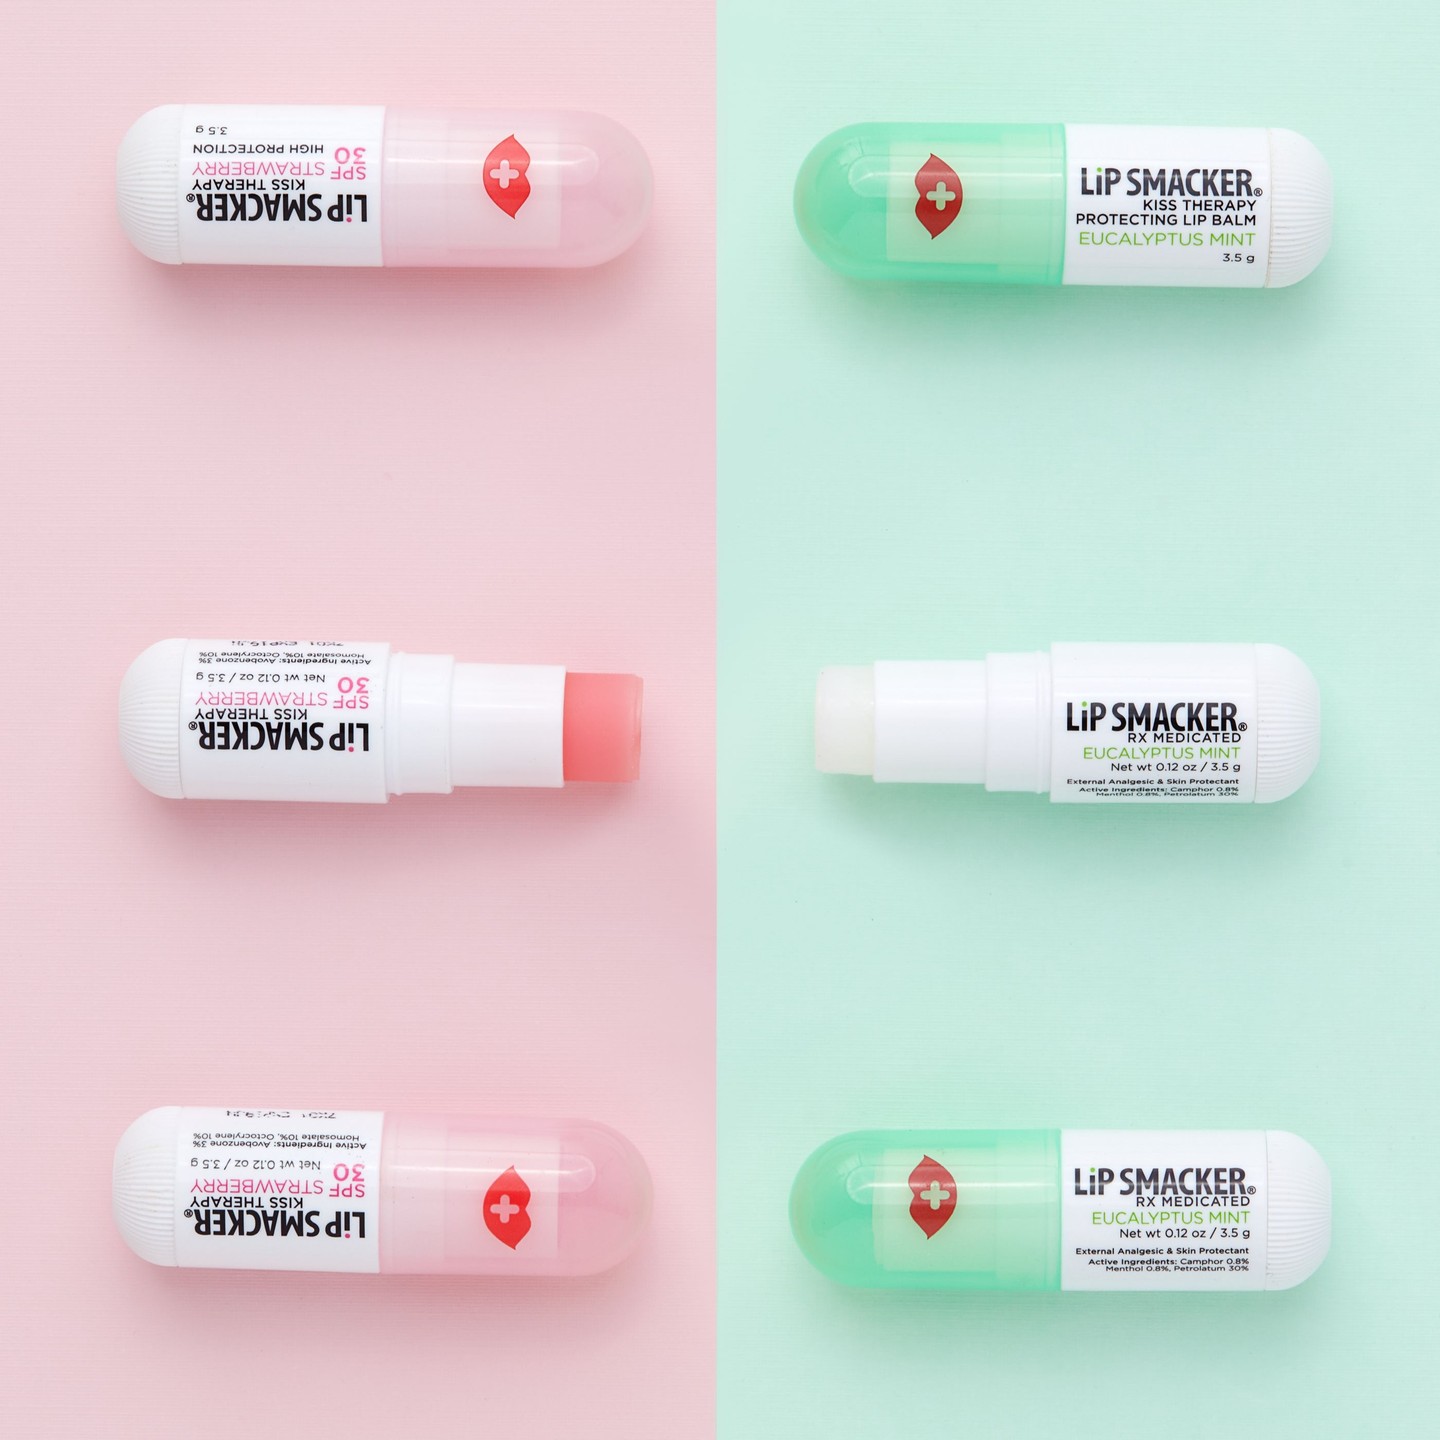 lipsmackerbrand-spf-protection-and-lip-moisturizer-never-runs-out-of-photo